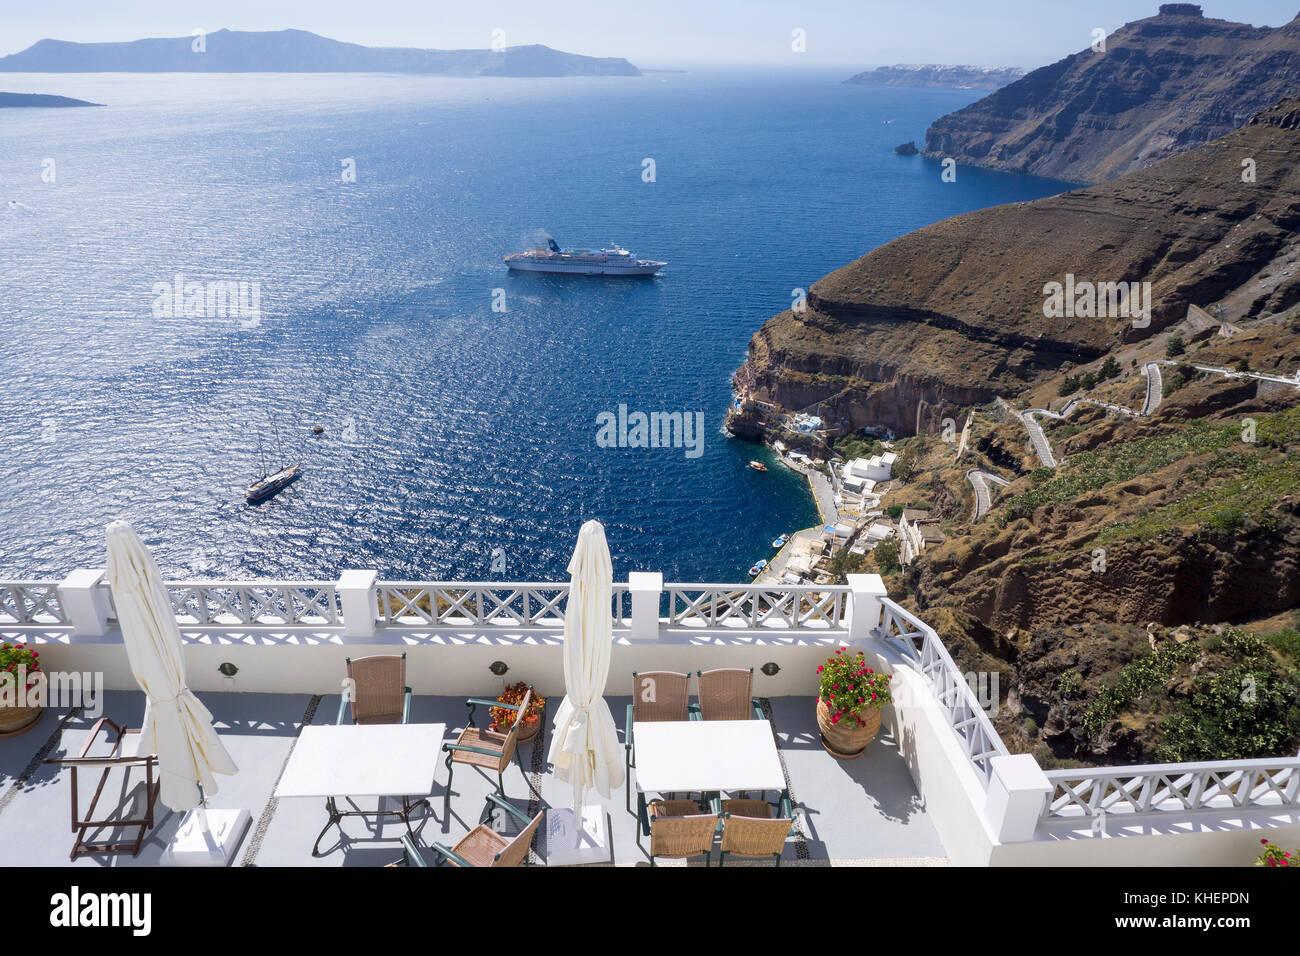 Roof terrace at the crater edge of with view on Caldera, Thira, Santorin island, Cyclades, Aegean, Greece Stock Photo